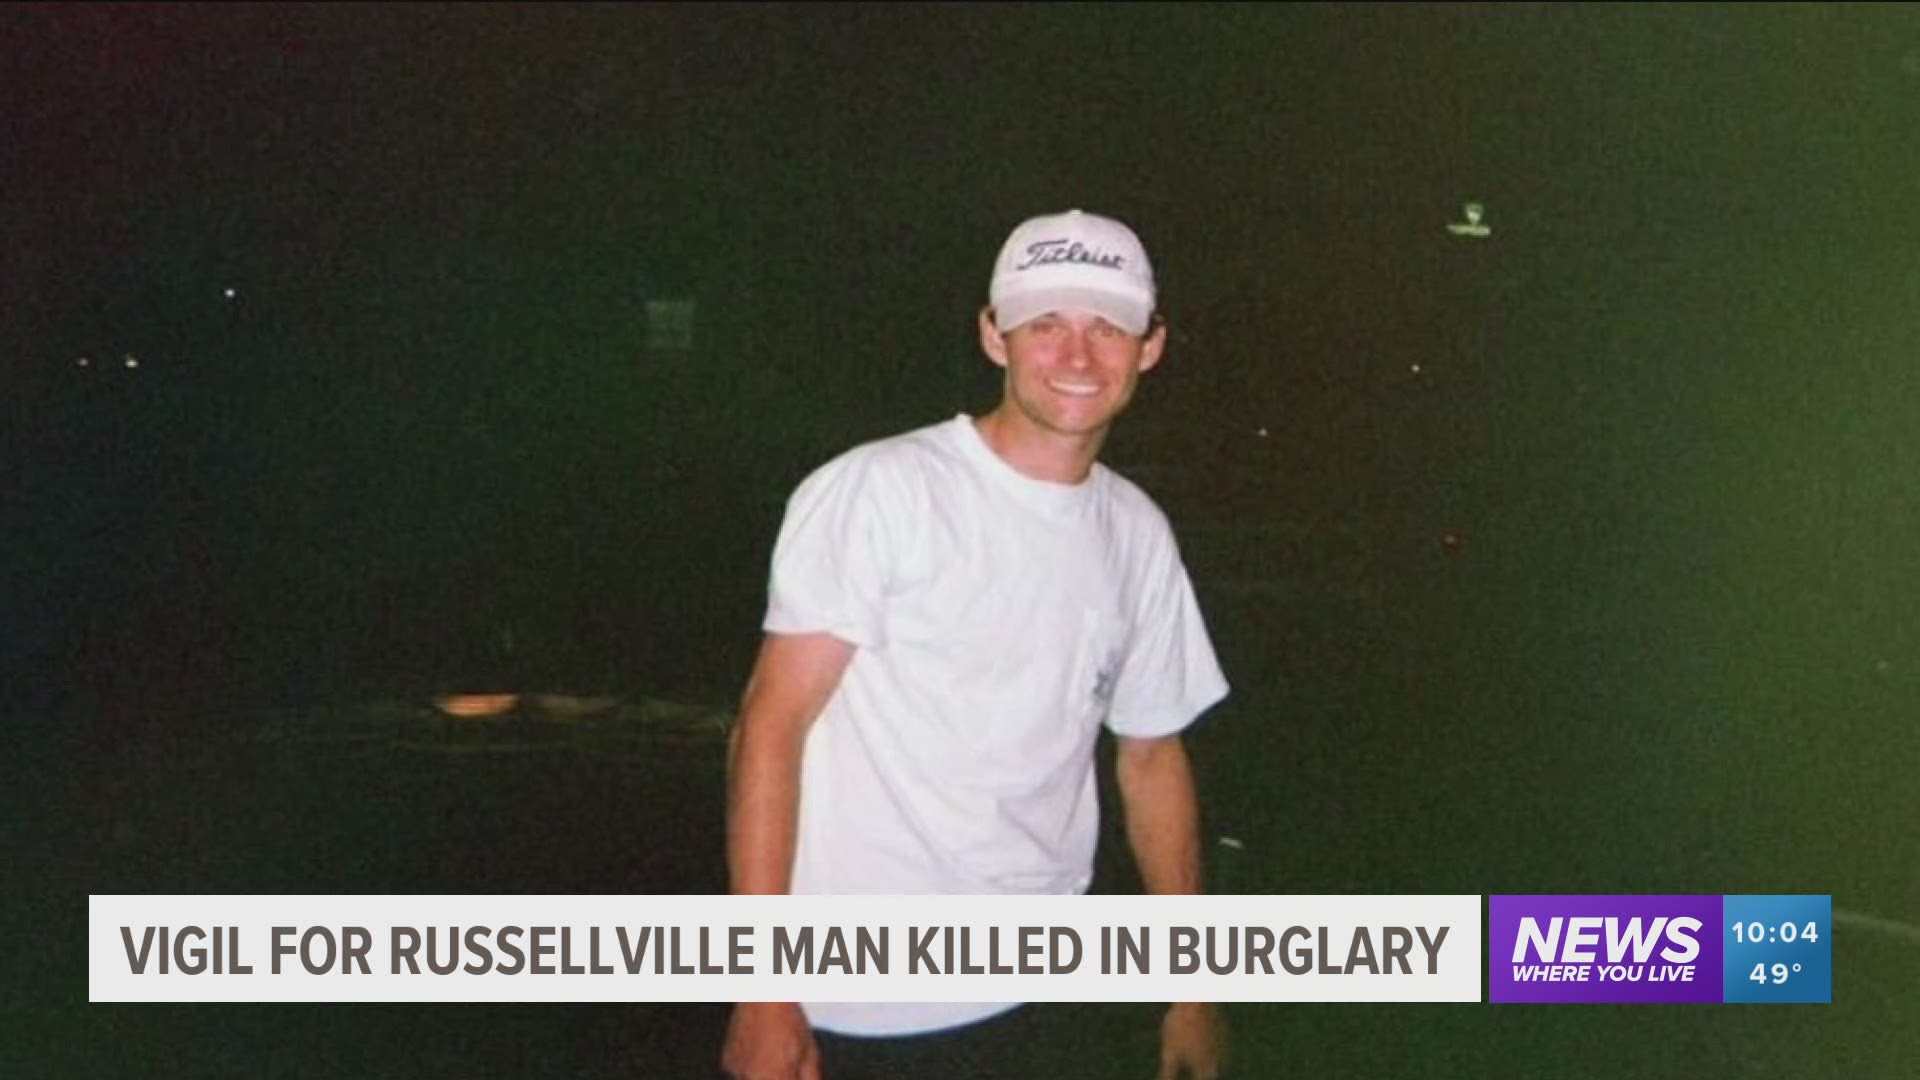 21-year-old Chase Reel of Russellville was killed during a burglary in Fayetteville. https://bit.ly/3leRM5a